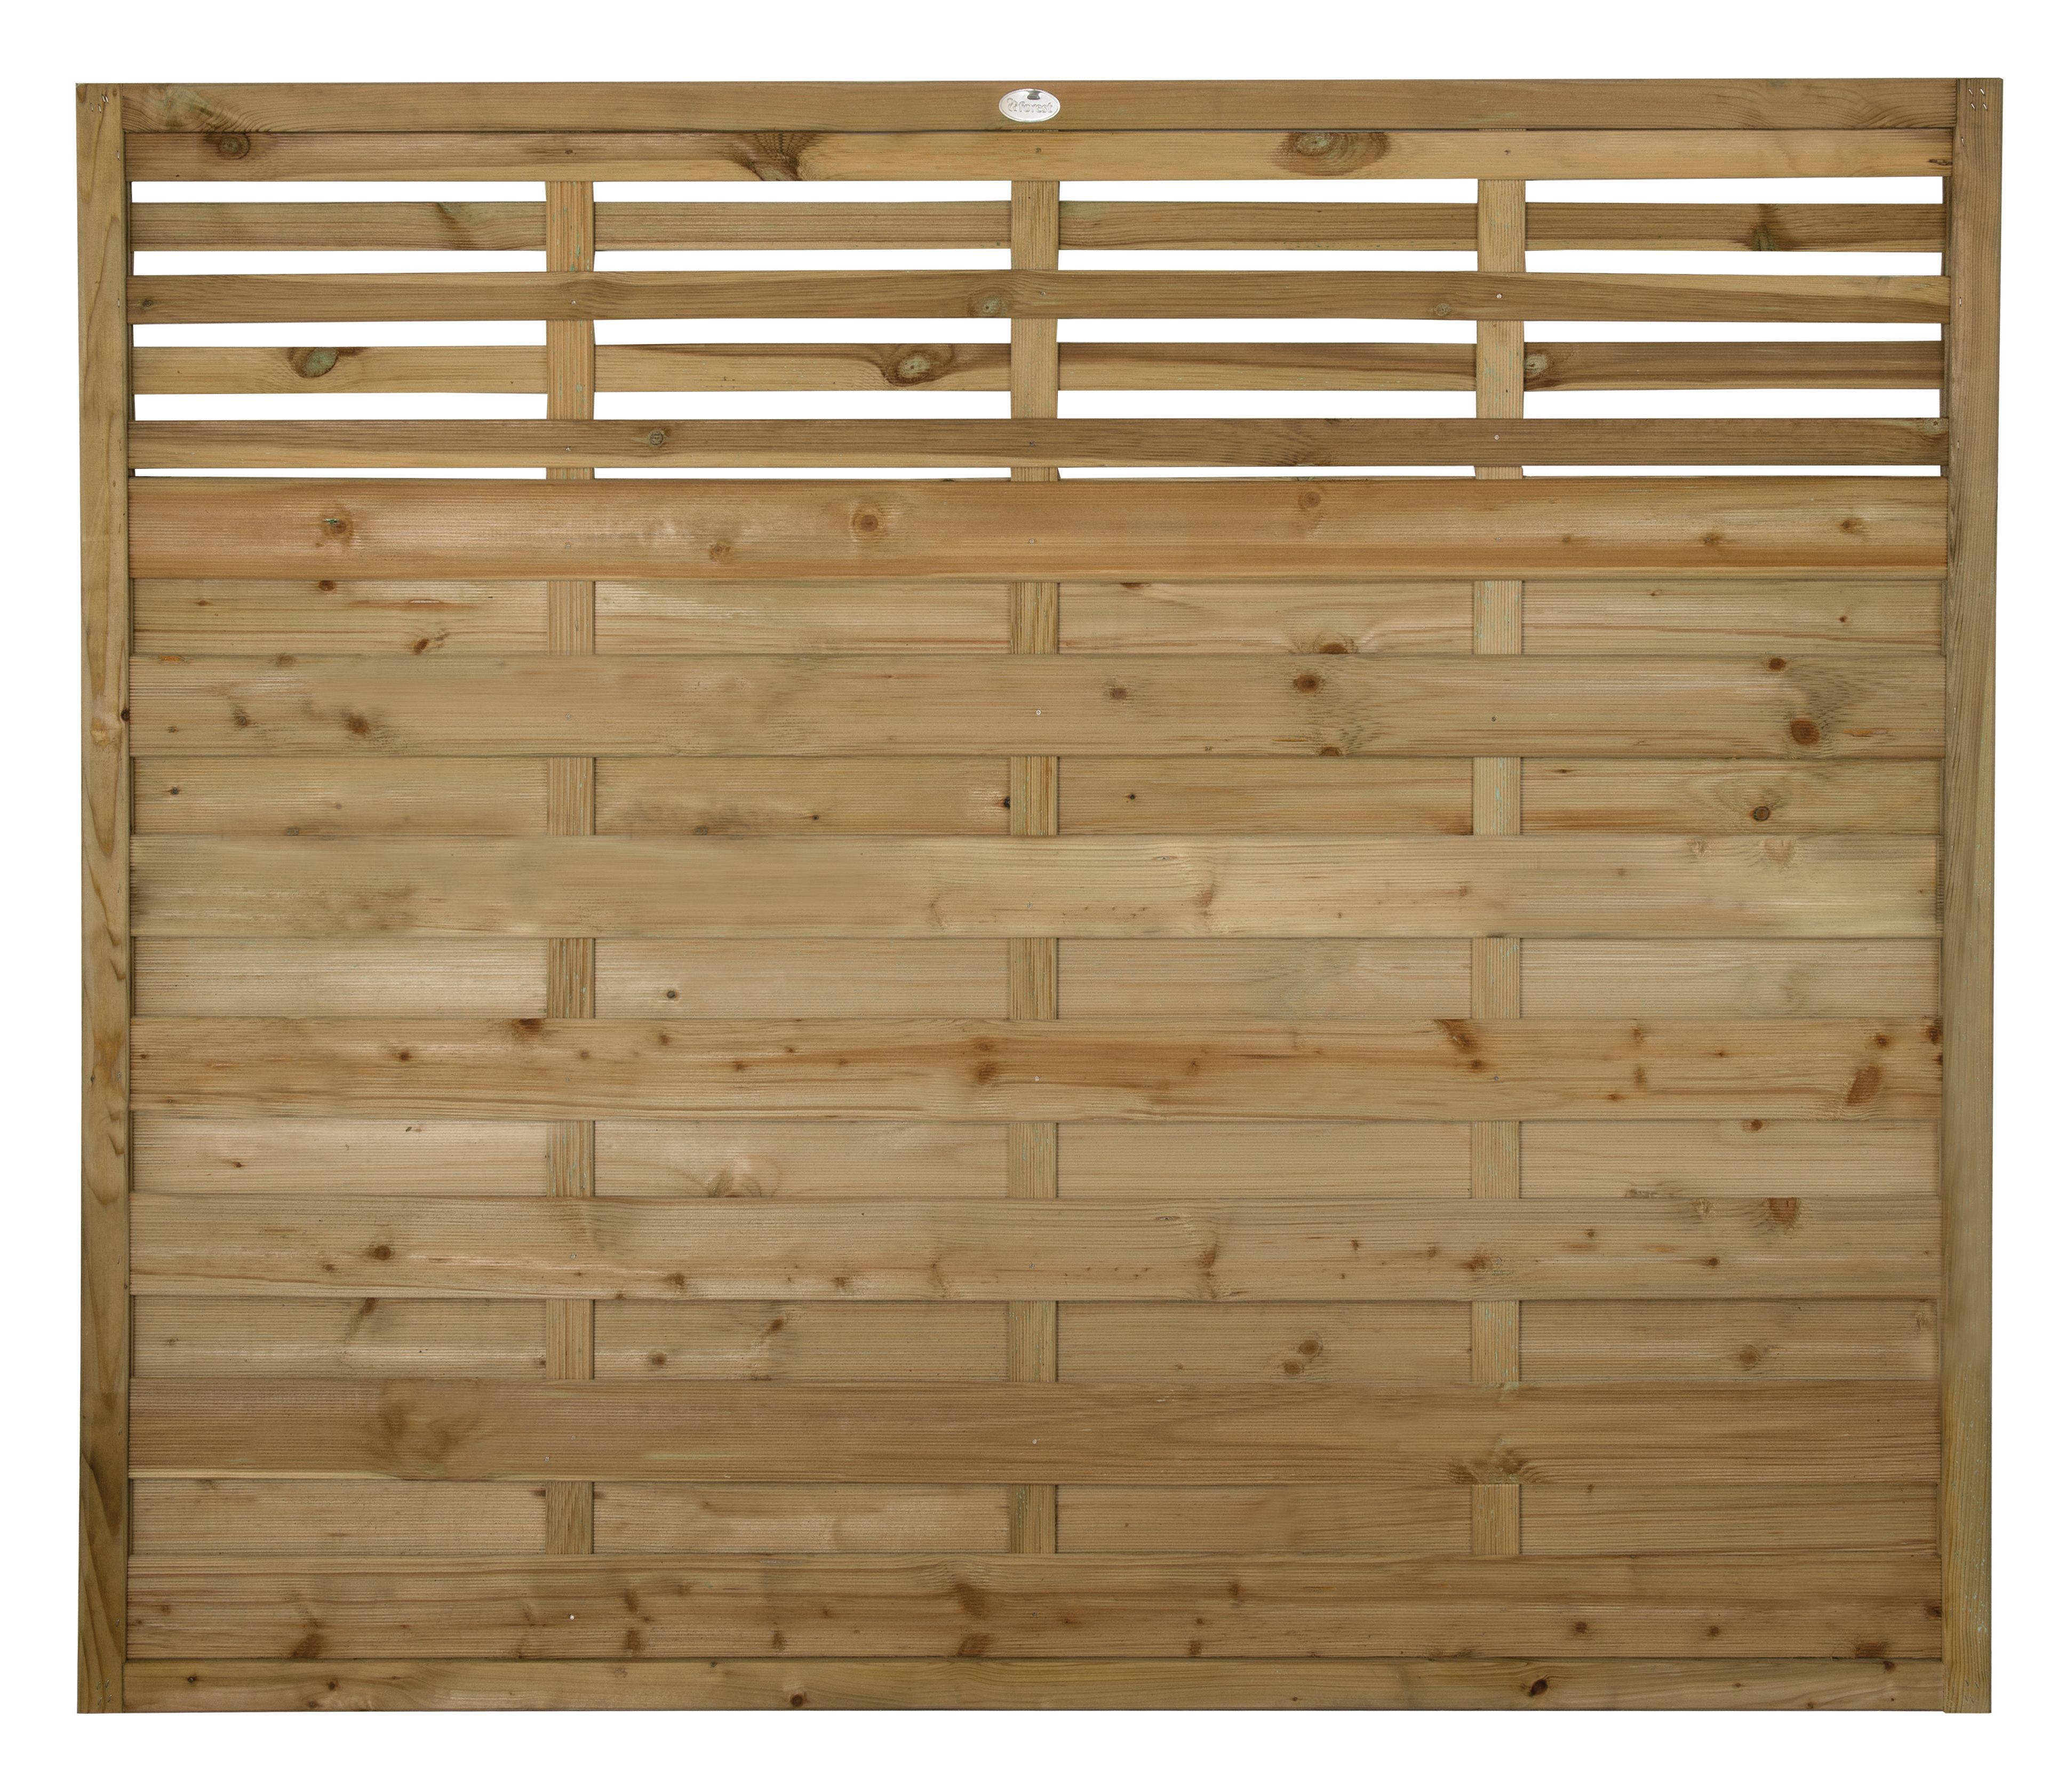 Image of Forest Garden Pressure Treated Kyoto Fence Panel - 1800 x 1500mm - 6 x 5ft - Pack of 5